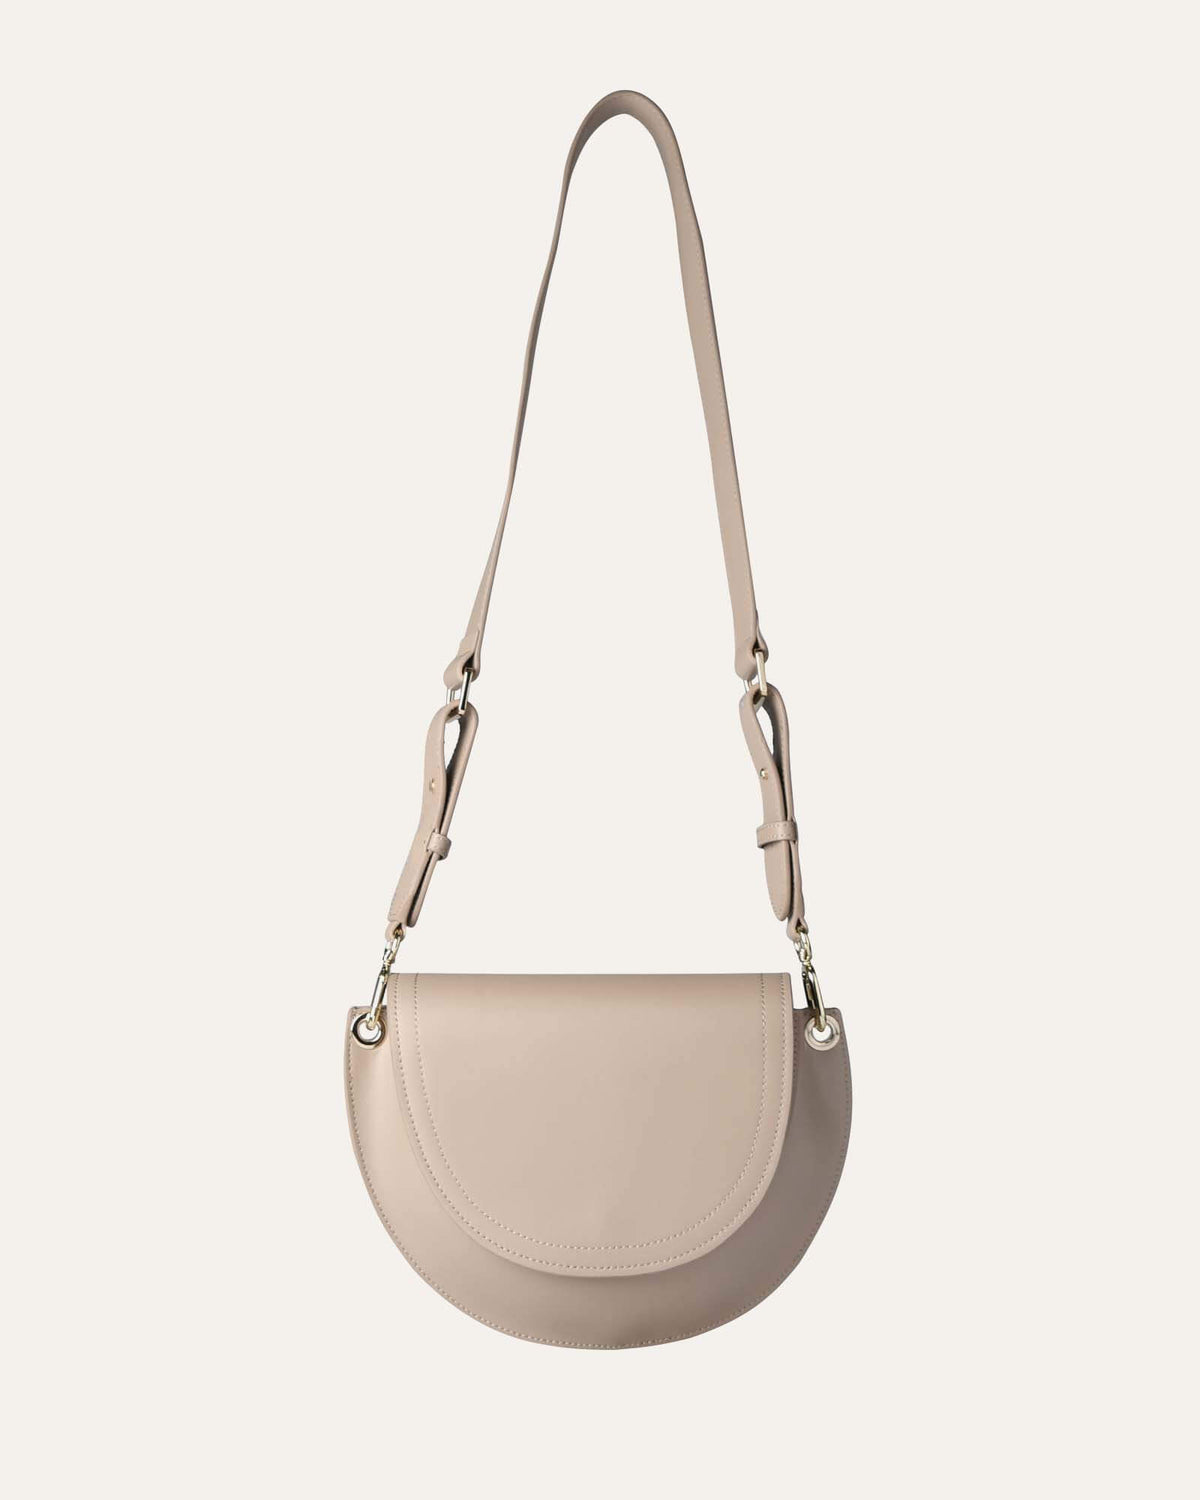 LORE CROSS BODY BAG TAUPE LEATHER